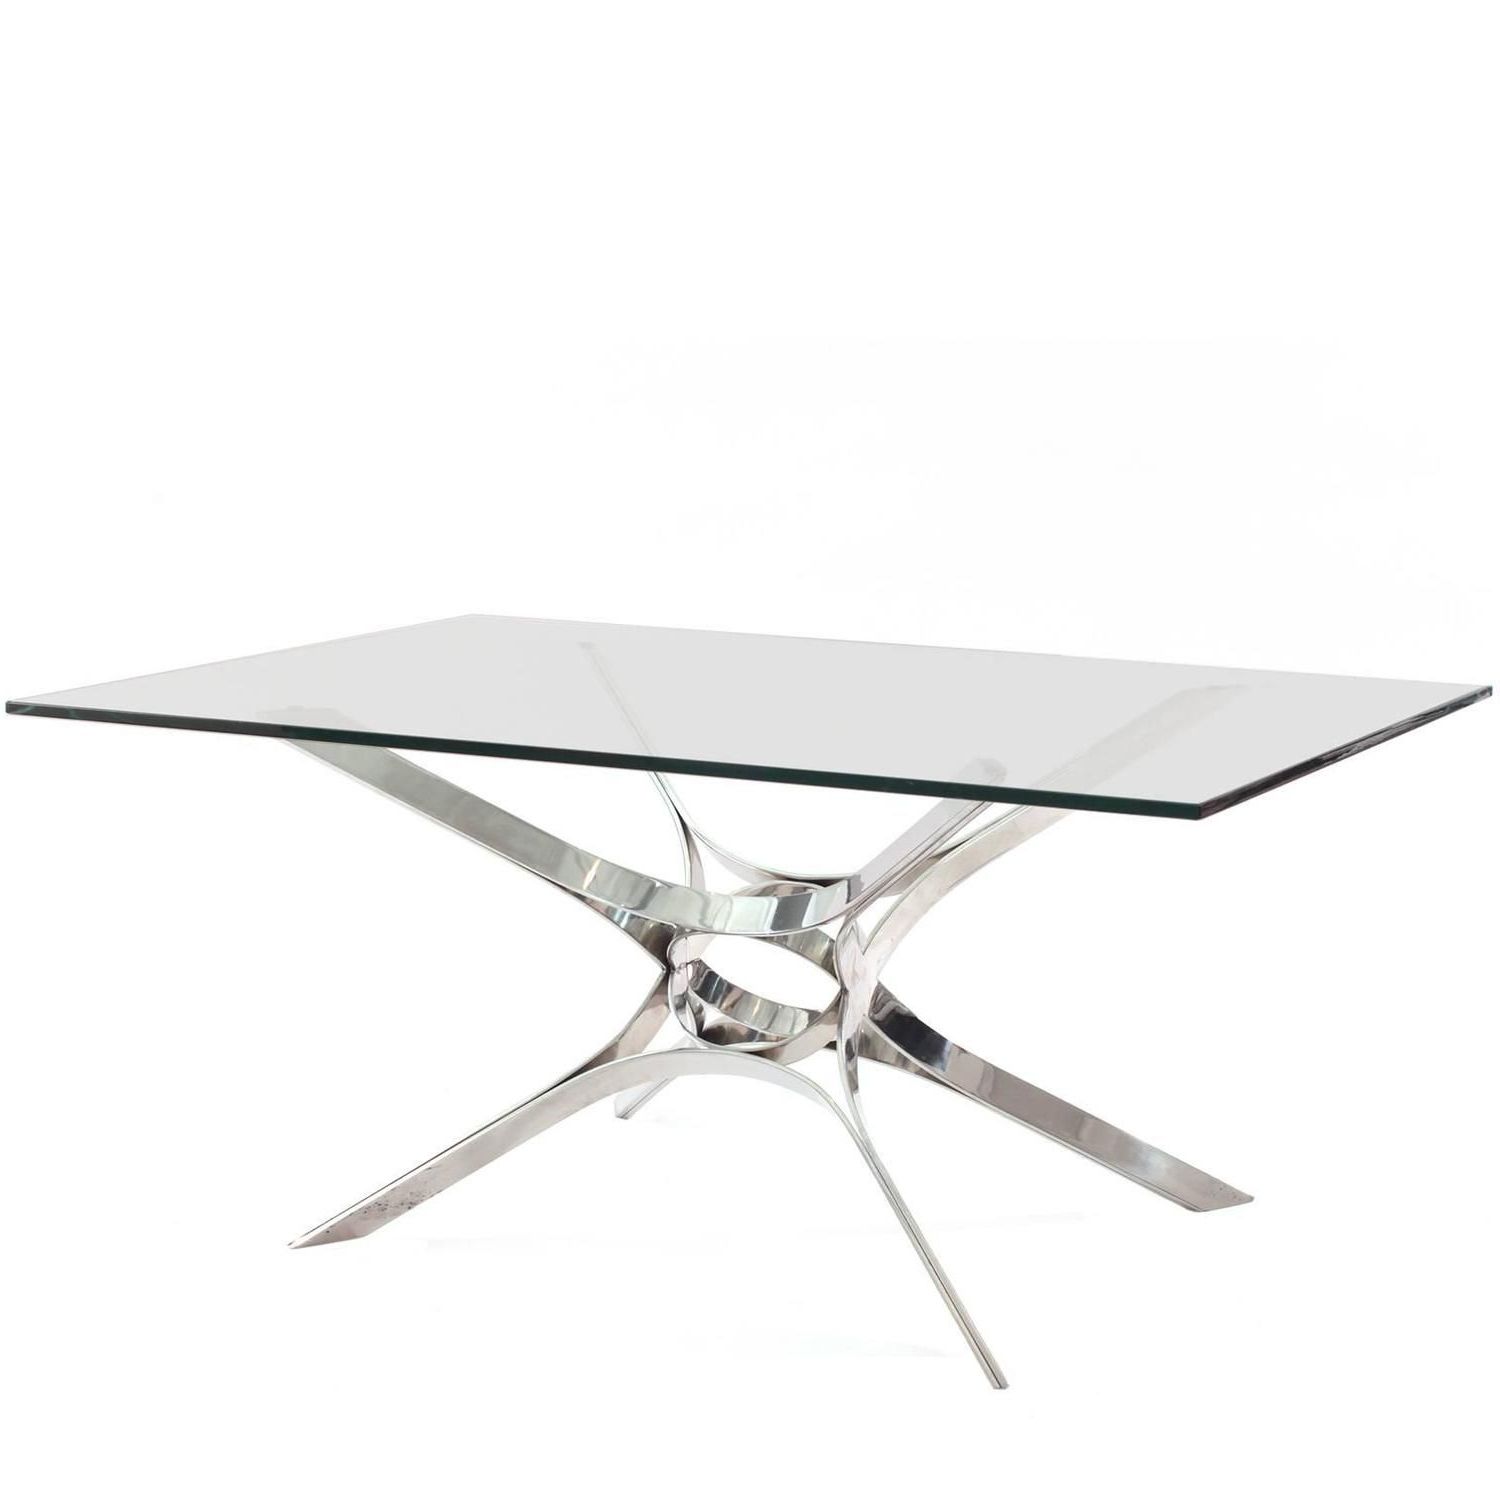 Well Known Mirrored And Chrome Modern Cocktail Tables Regarding Sculptural Chrome Cocktail Tableroger Sprunger For (View 10 of 20)